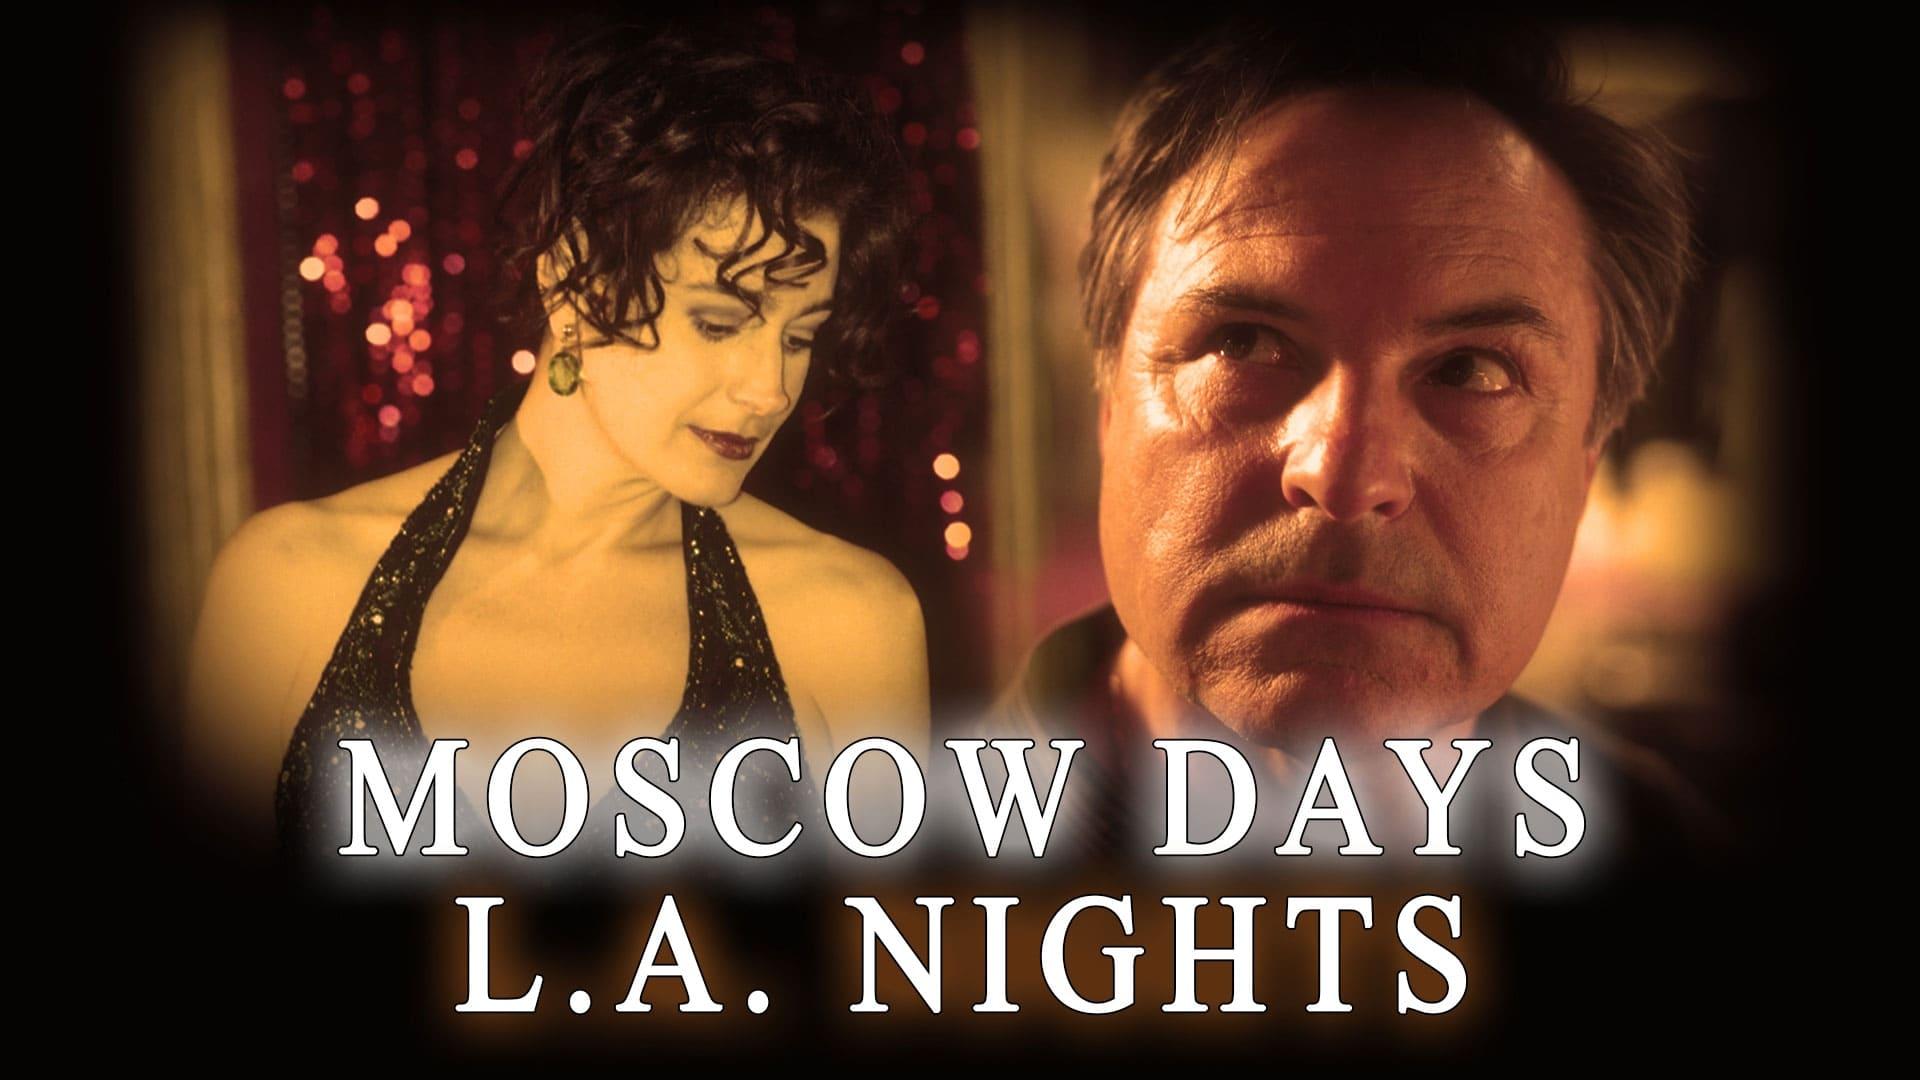 Moscow Days, L.A. Nights backdrop